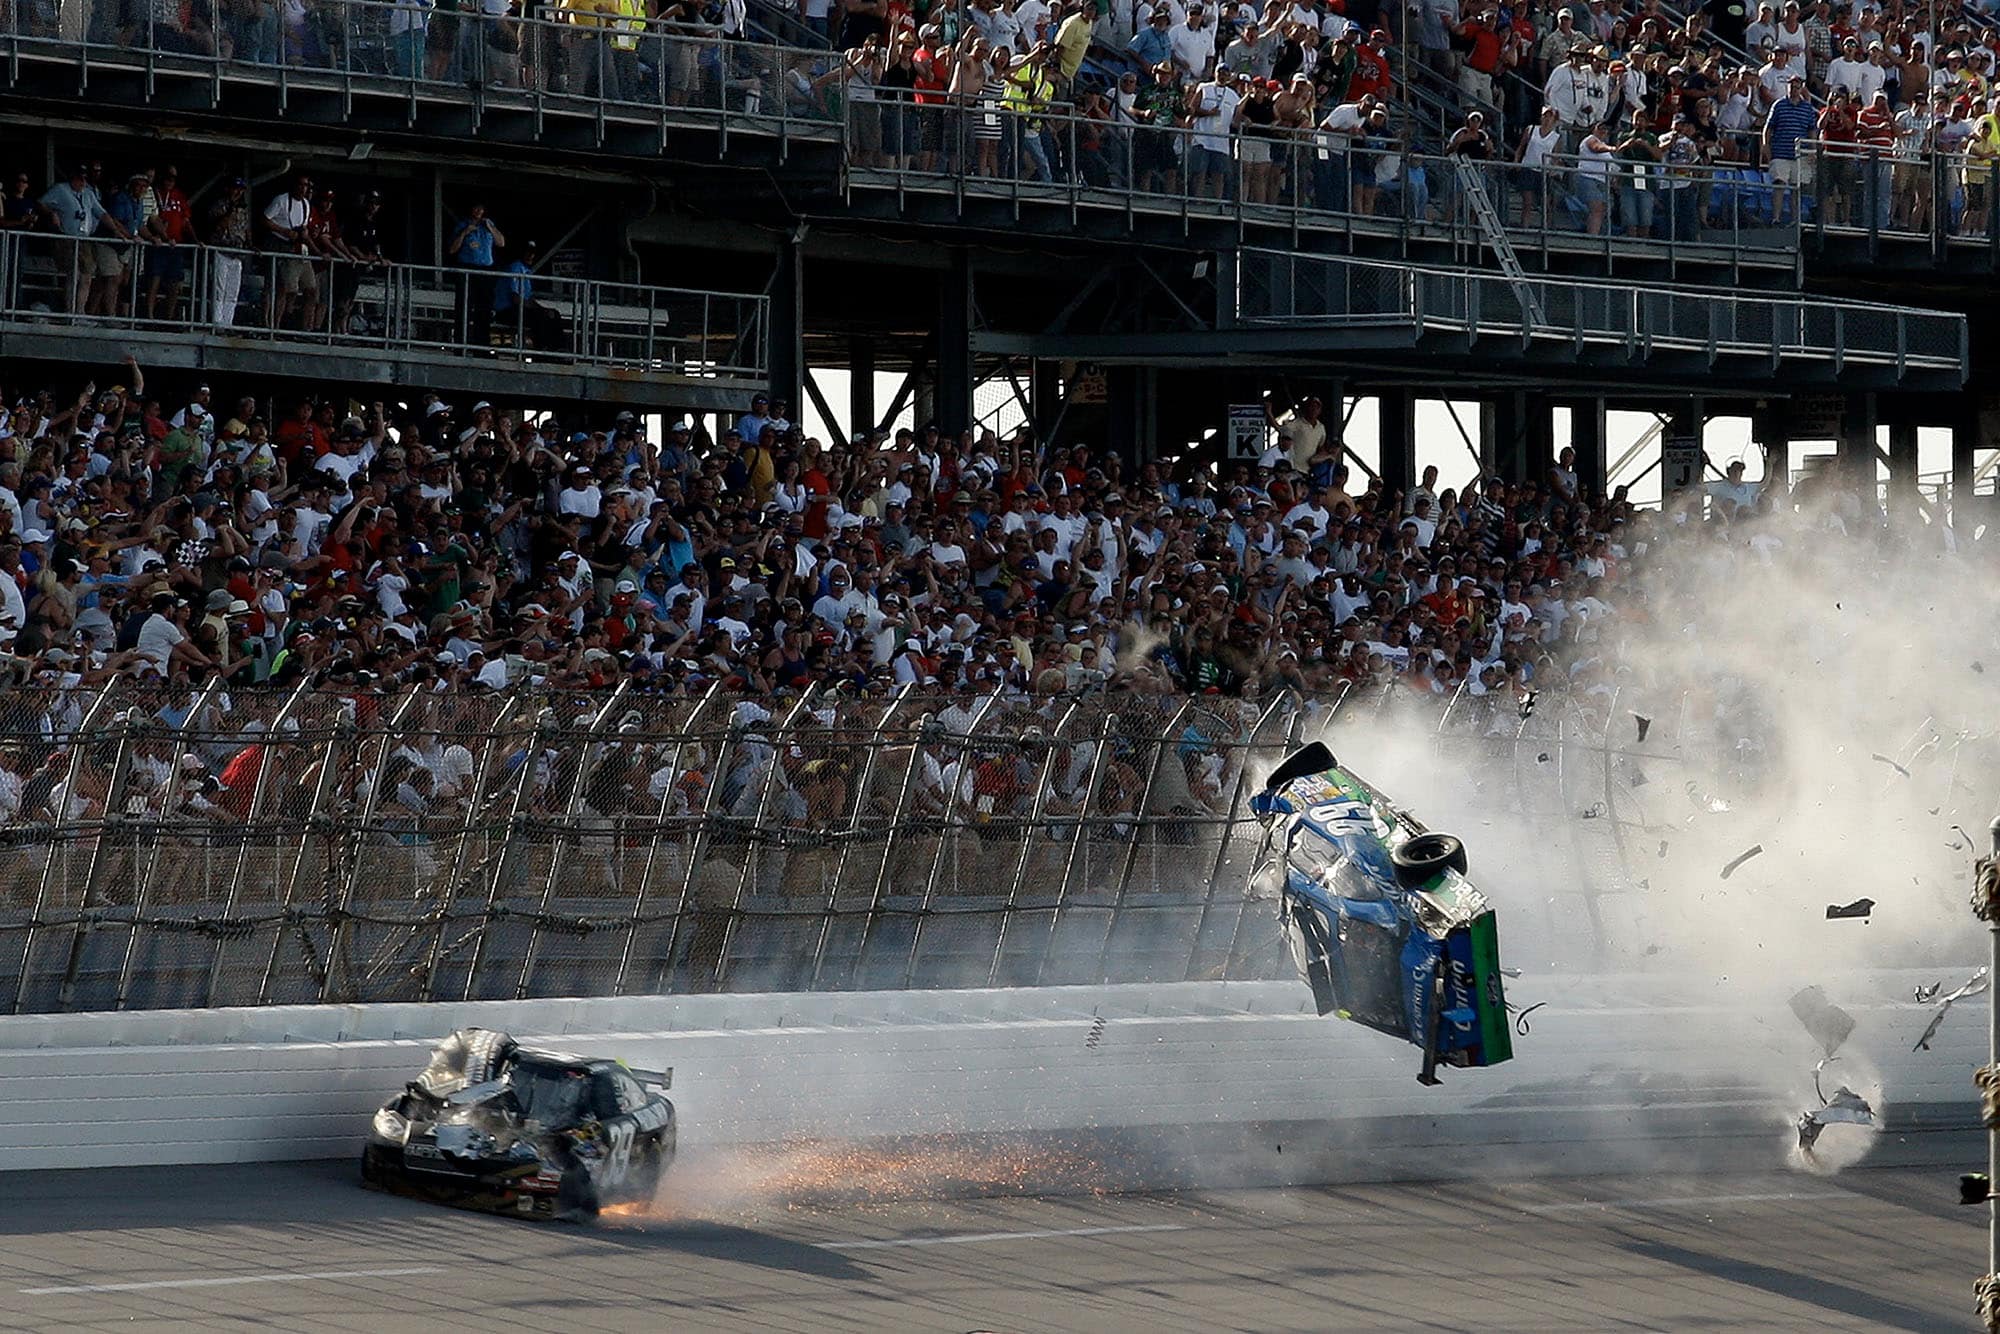 Carl Edwards is launched into the air after contact with Brad Keselowski at Talladega in 2009